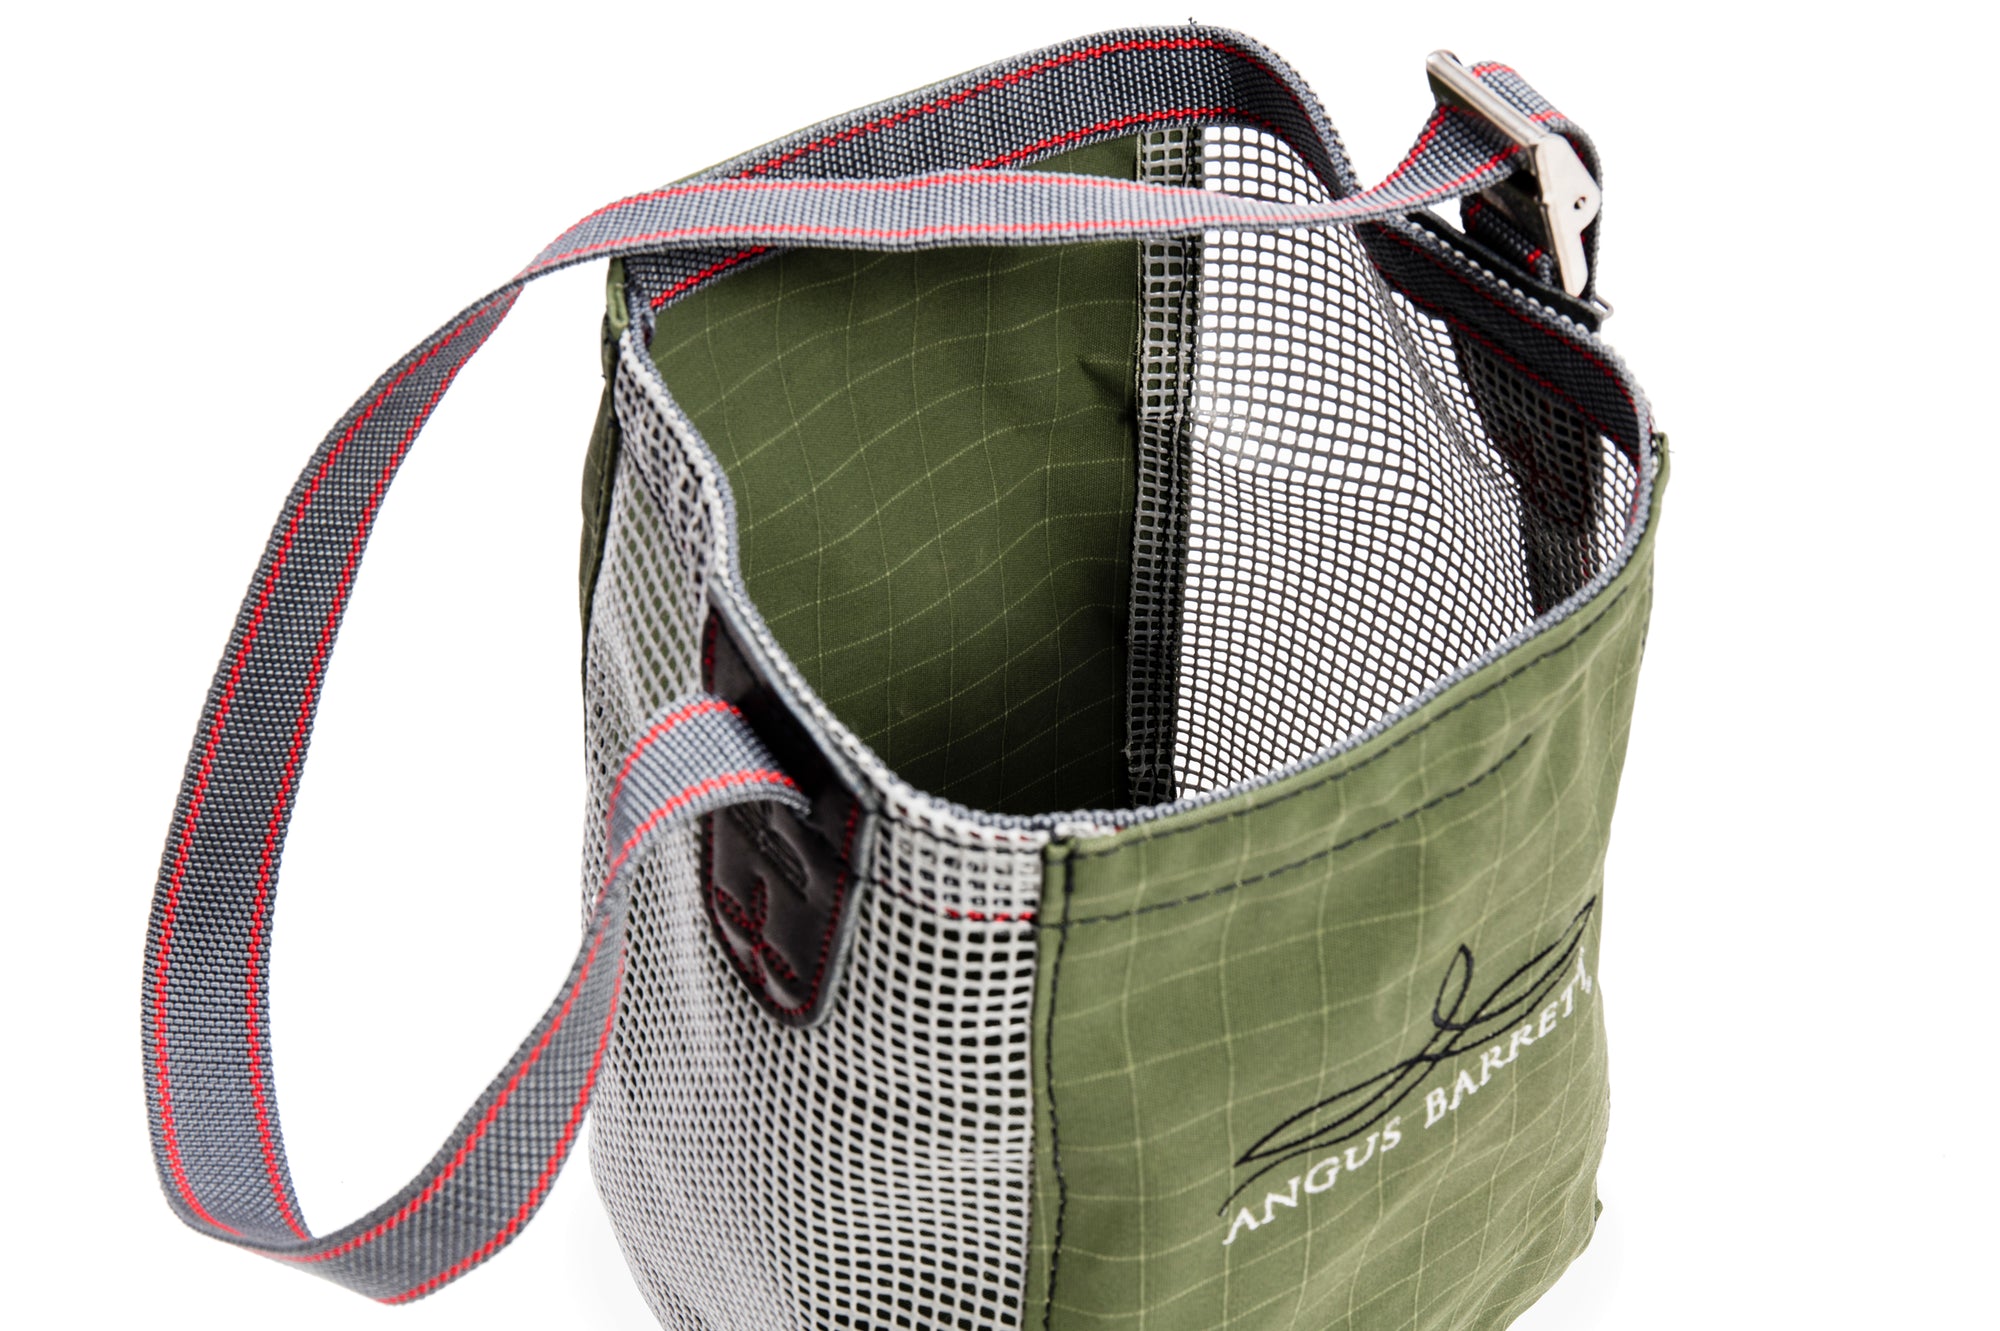 Angus Barrett Nose Bag - Ripstop Canvas with PVC mesh